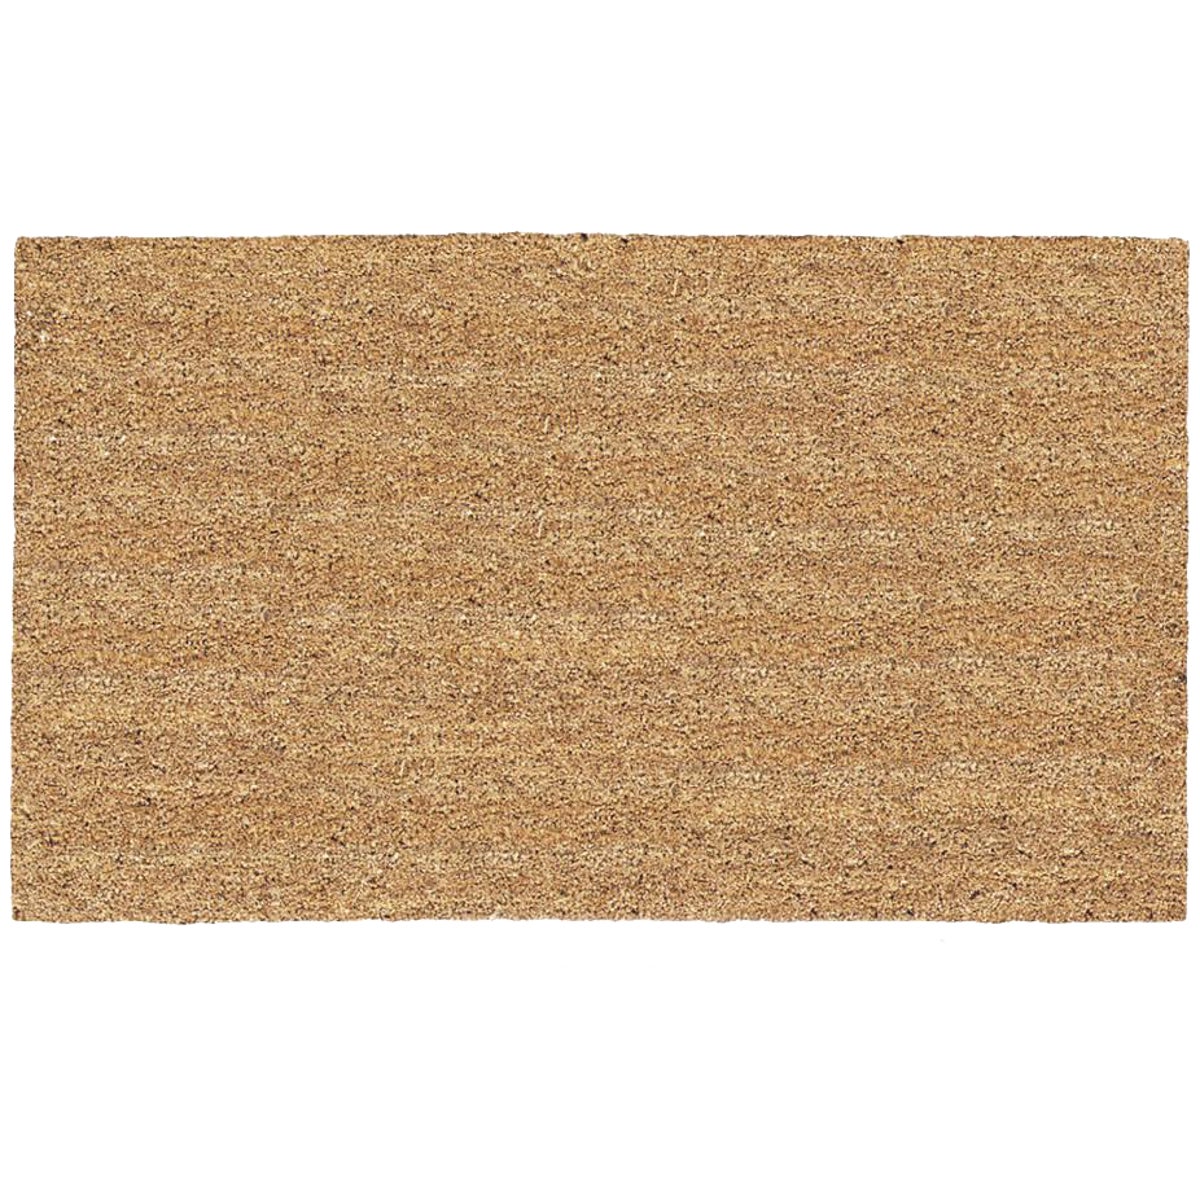 Item 621692, Americo Home Coir Entrance Mats combine the beauty of natural fibers with 